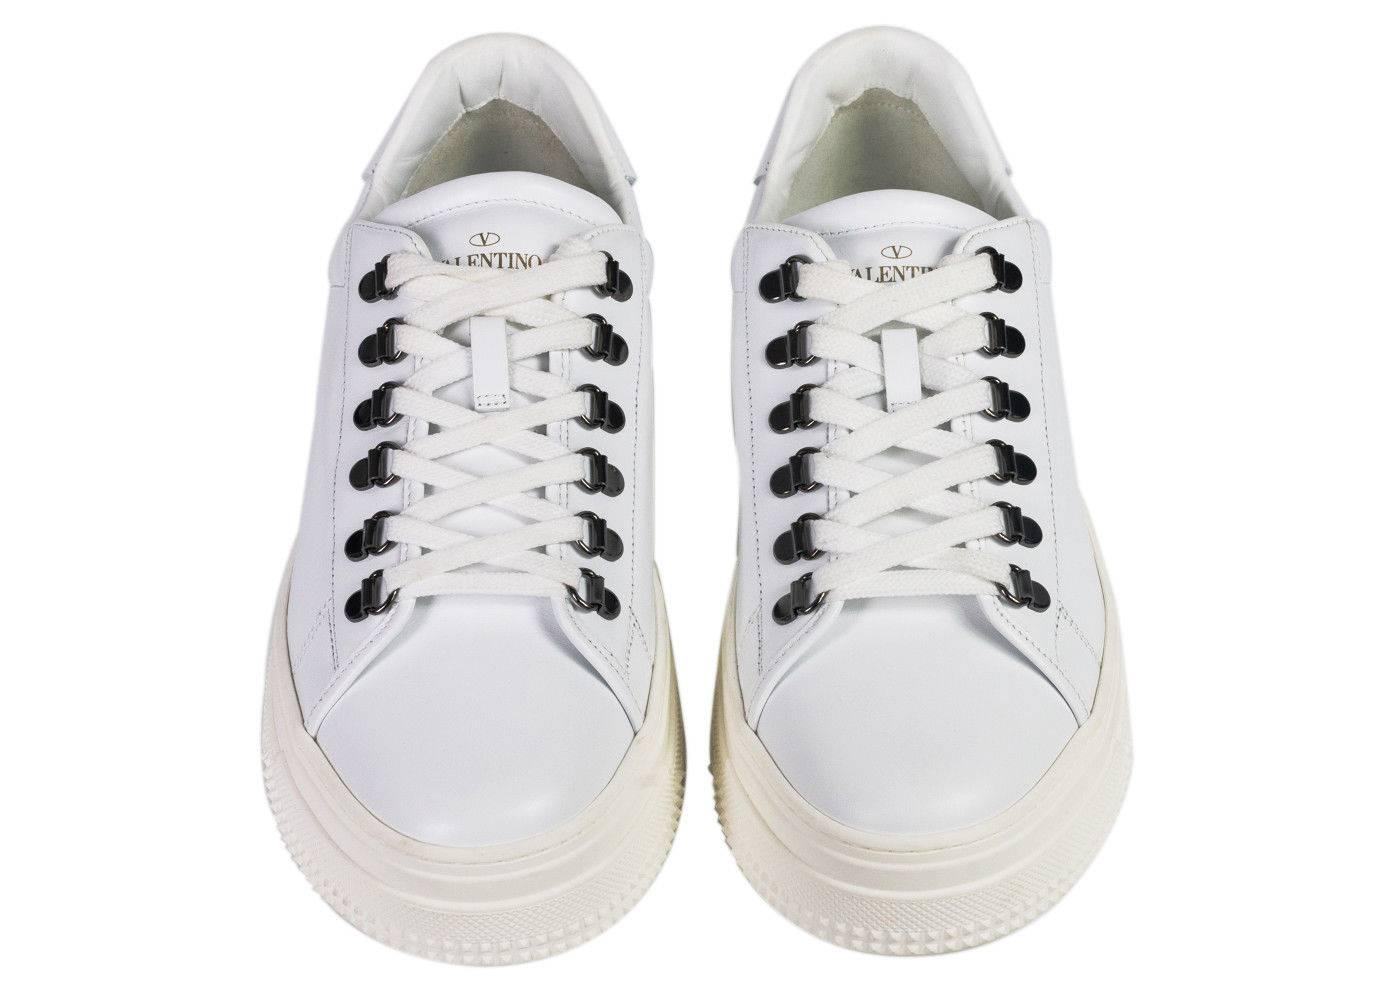 Brand New Valentino Lace Up Platform Sneakers
Original Tags and Dust Bag Included
Retails in Stores & Online for $975
Mens Size EUR 43 / US 10 Fits True to Size


The Valentino Lace-Up Platform sneakers are the new modern. This shoe features a